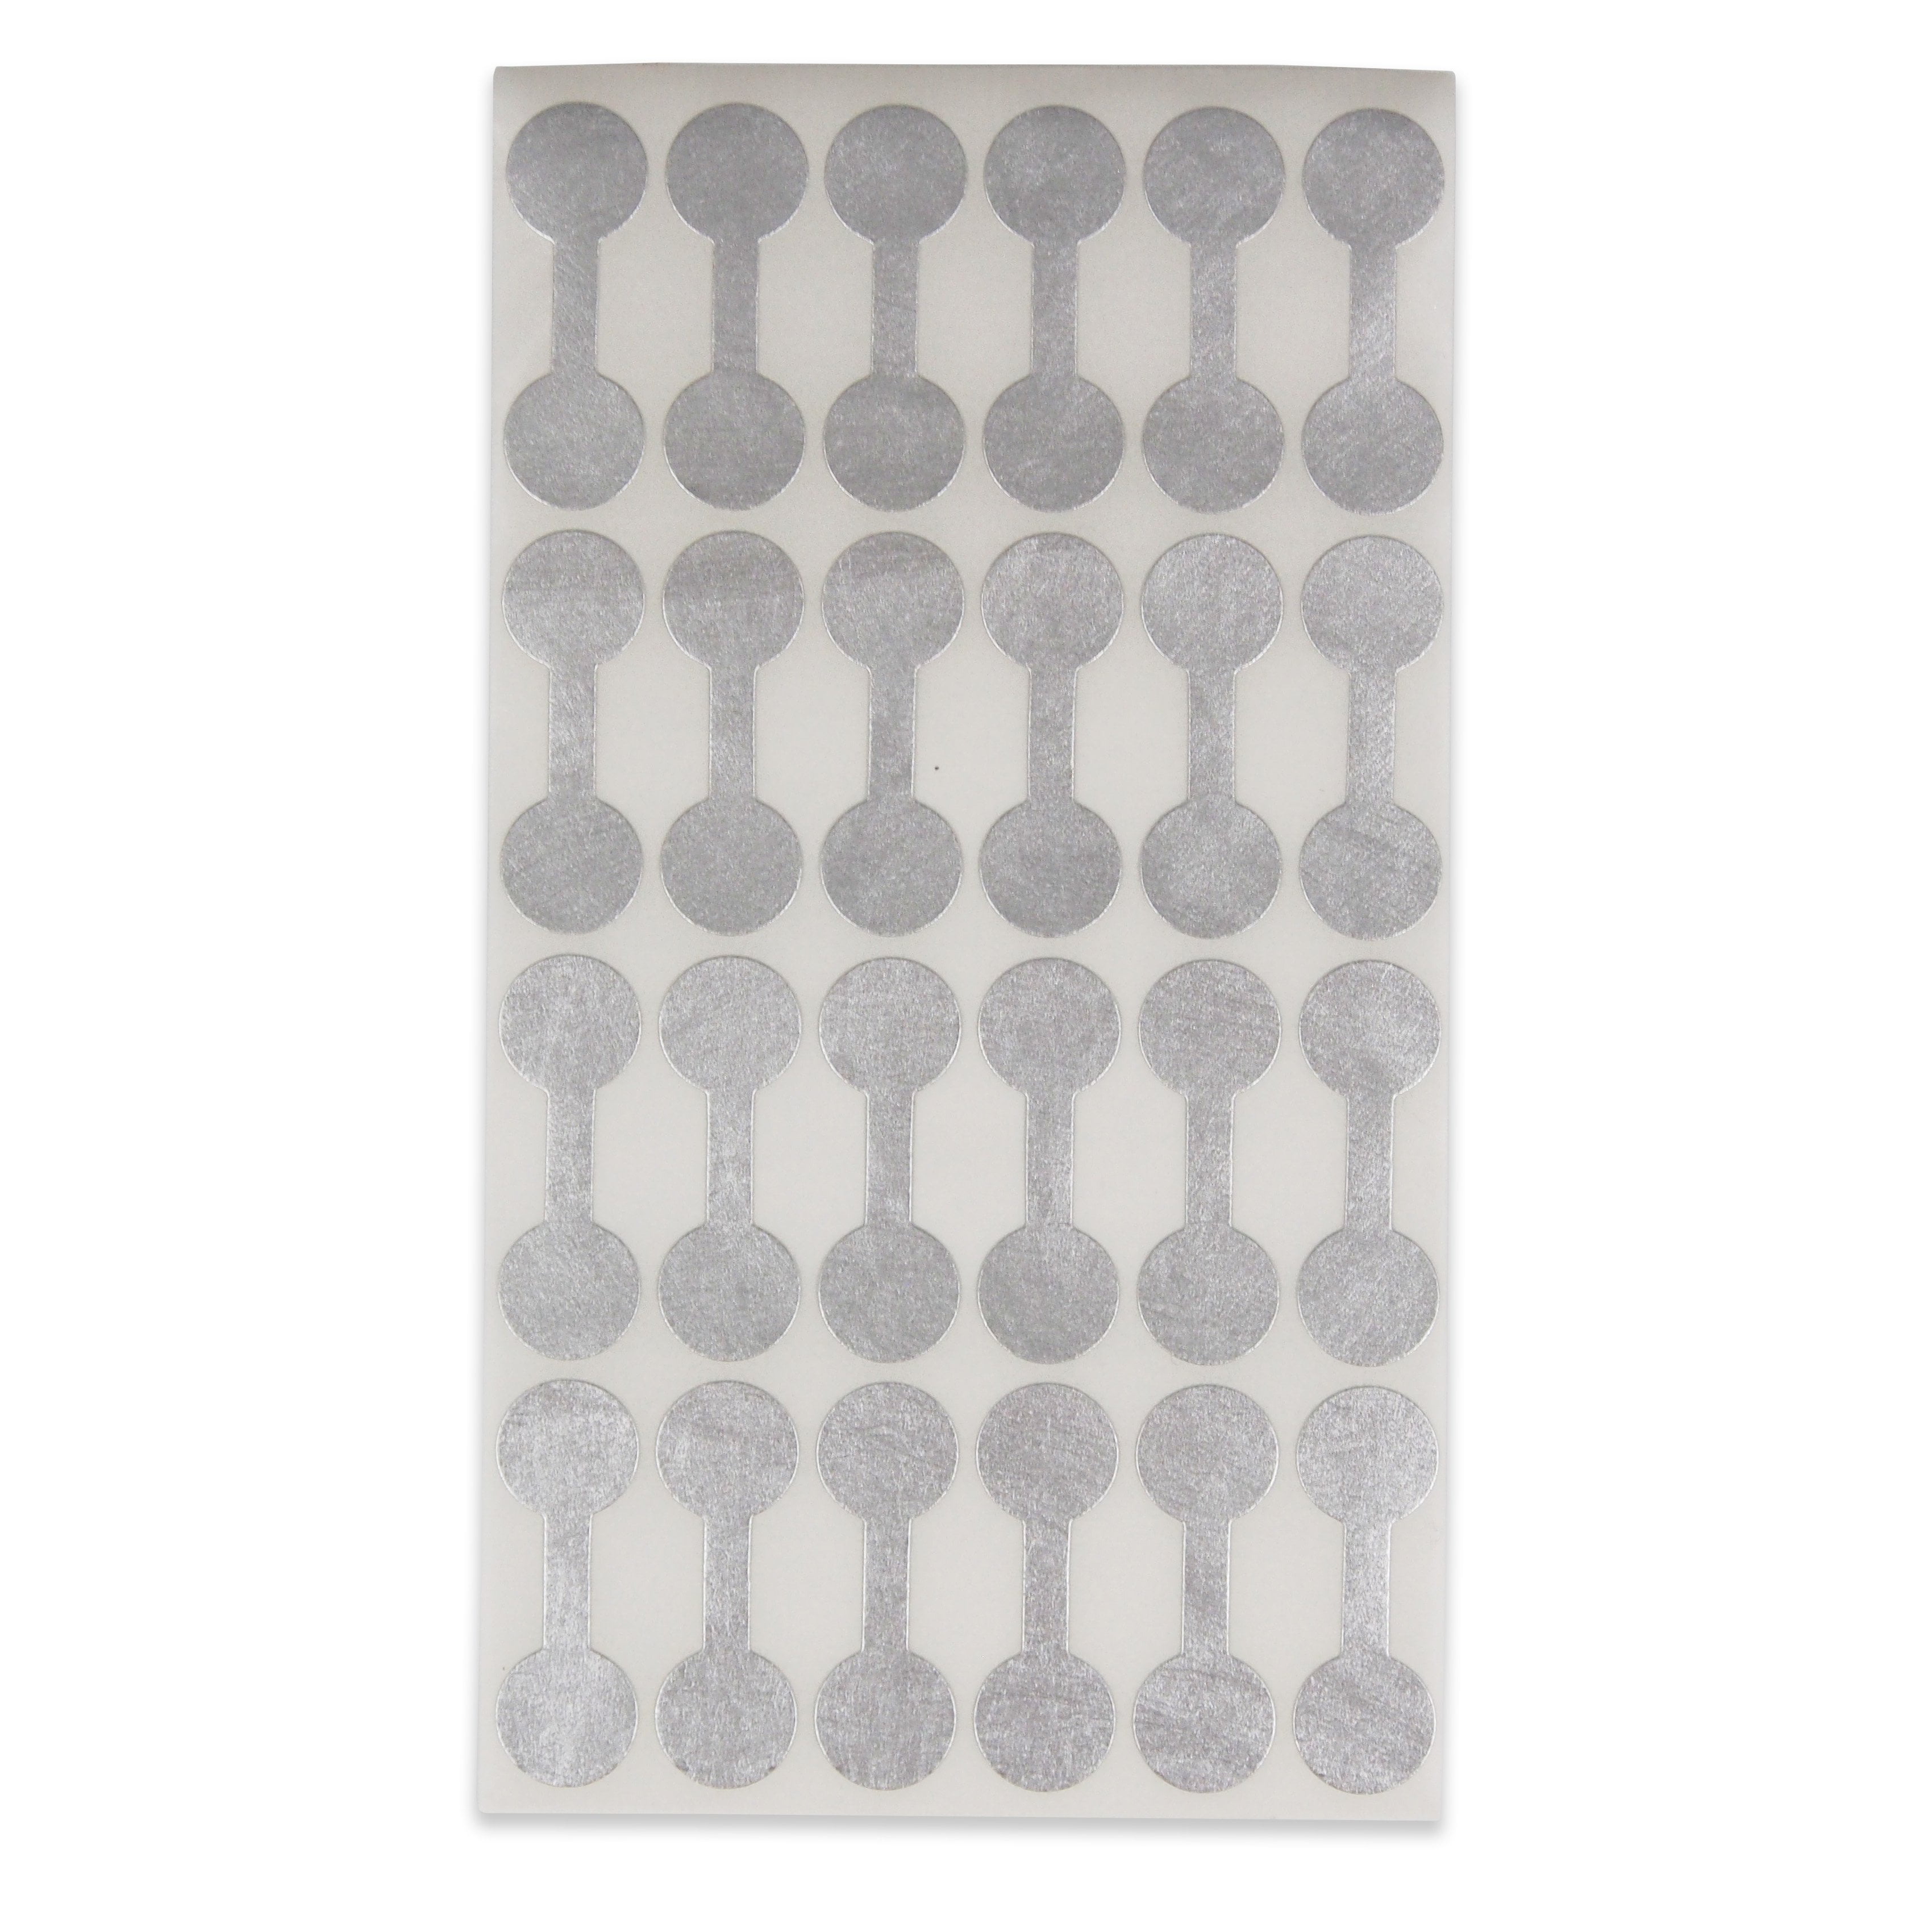 1000 PCS White Price Tags Stickers, Jewelry Square Barbell Labels Dumbbell  Tags - Helia Beer Co